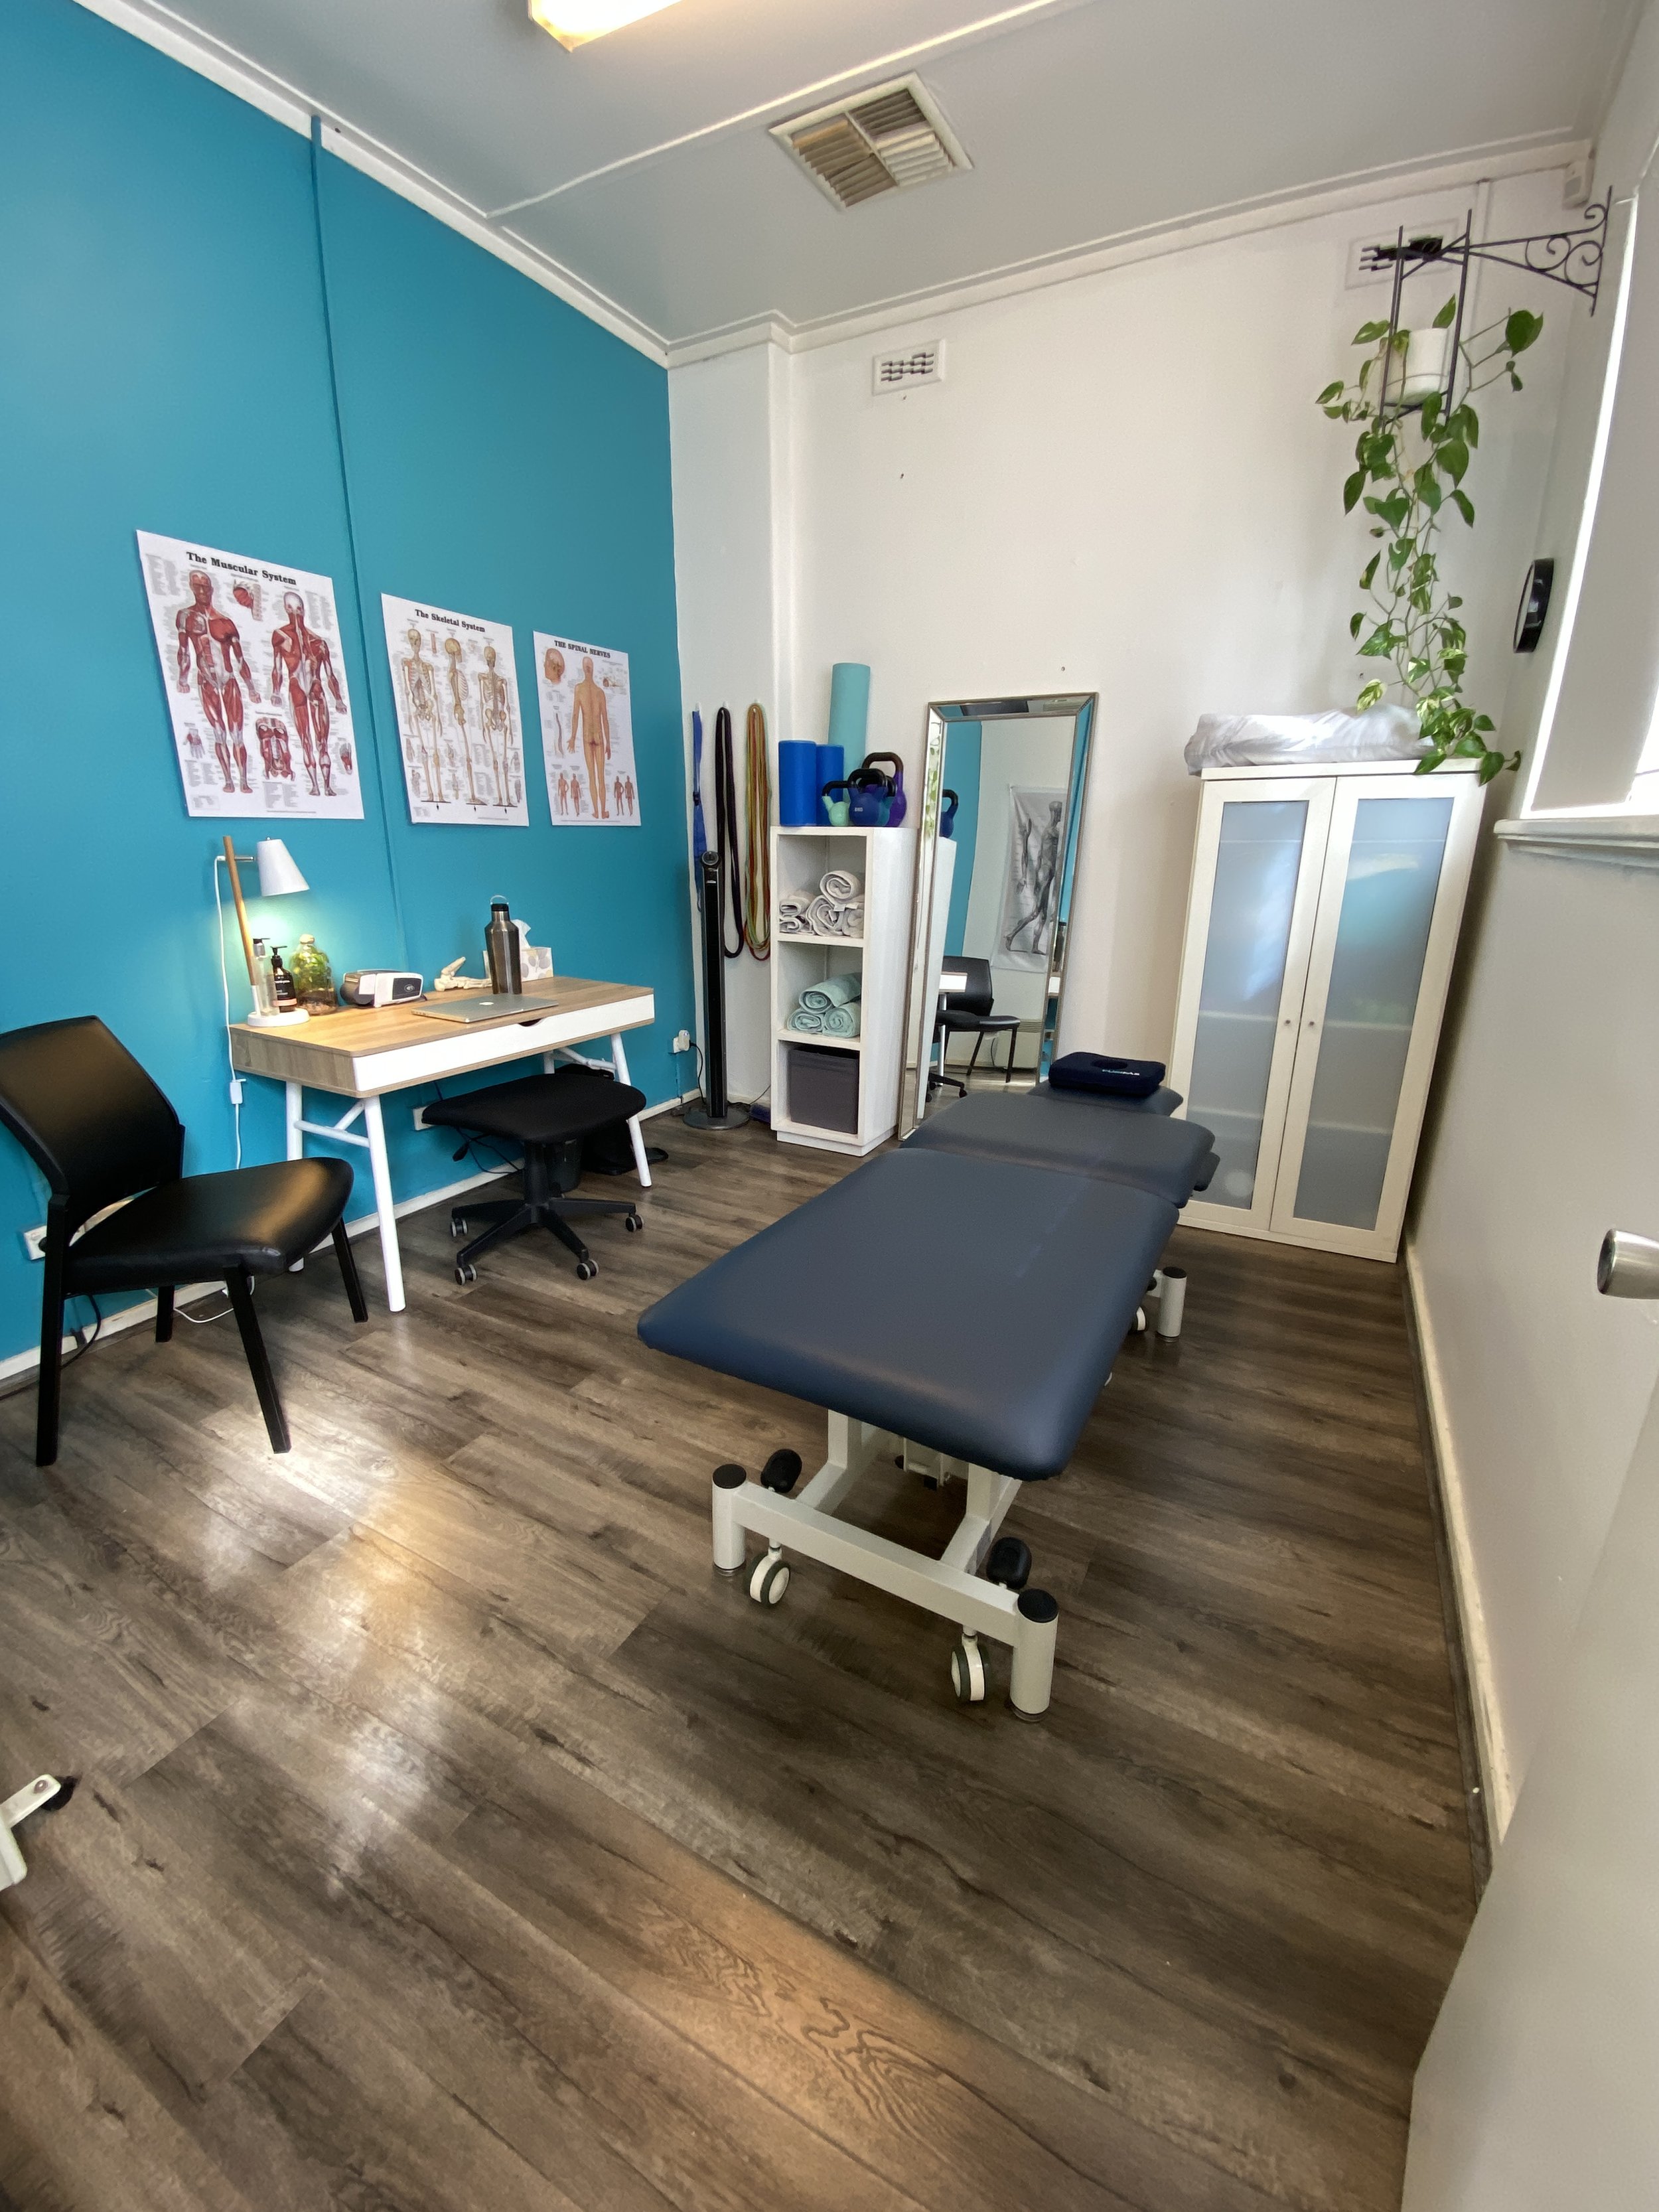 West Pert Formotion Physio Clinic Room.JPG